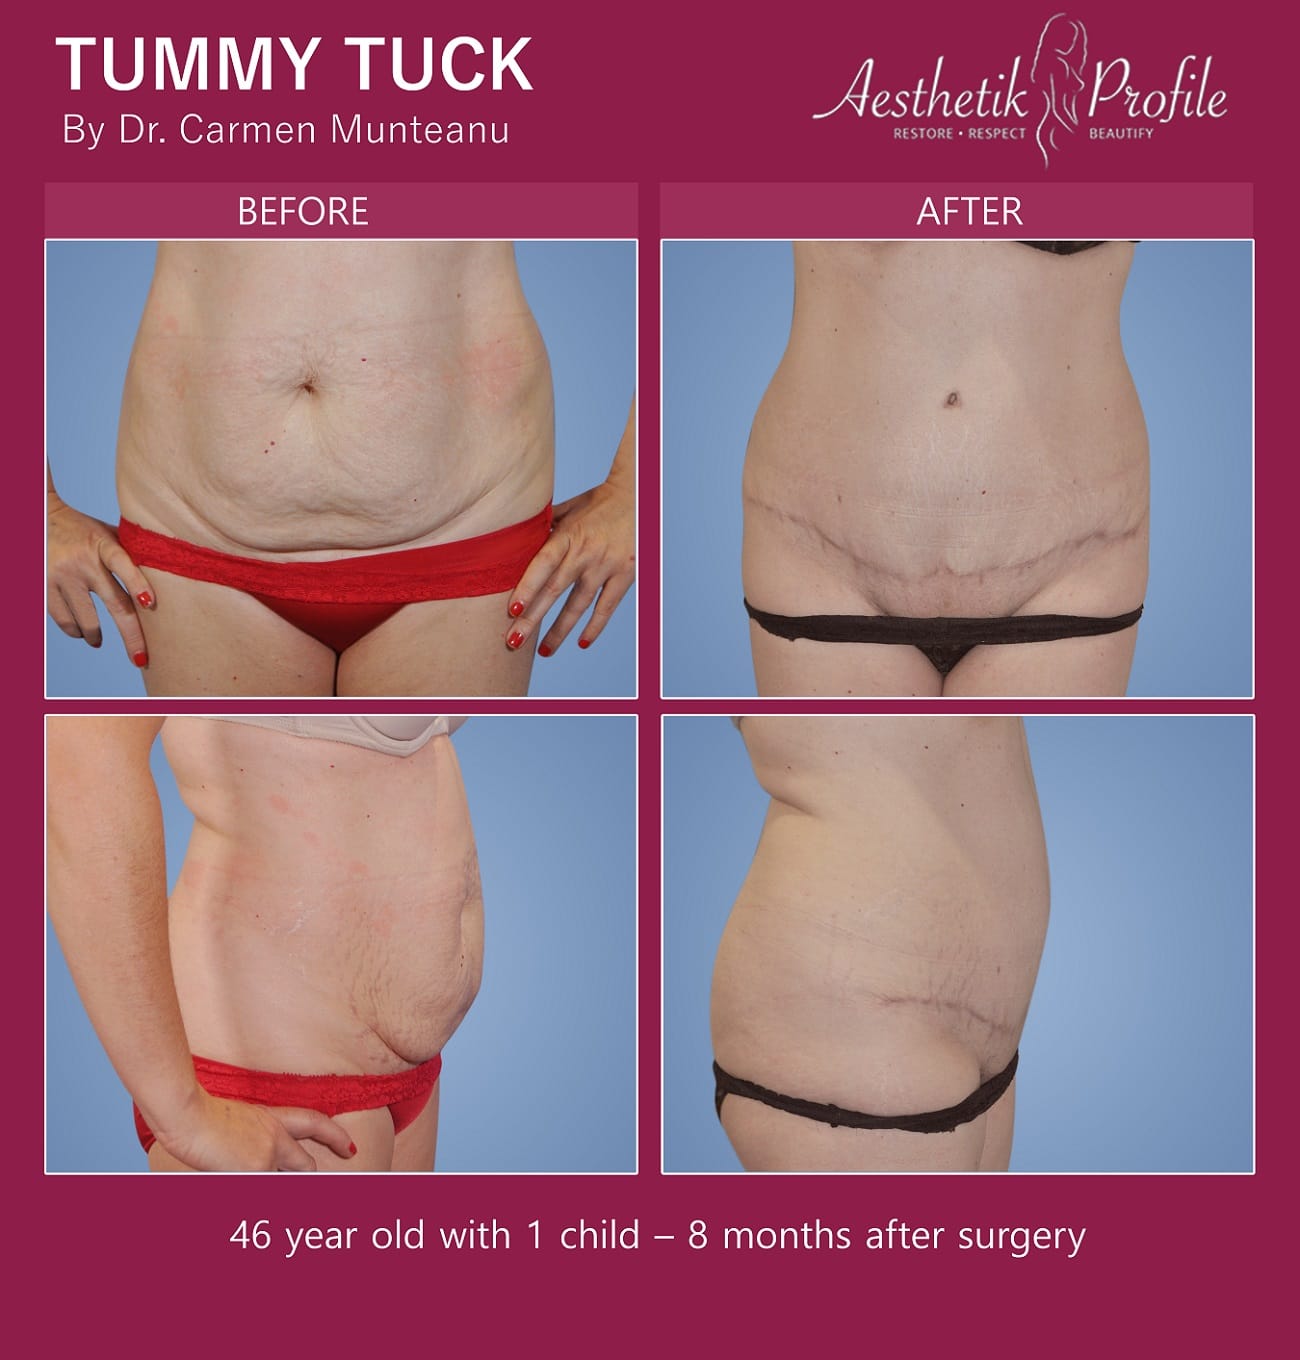 Tummy Tuck Before and After Photos - Dr Carmen Munteanu - Best Tummy Tuck Surgeon Melbourne